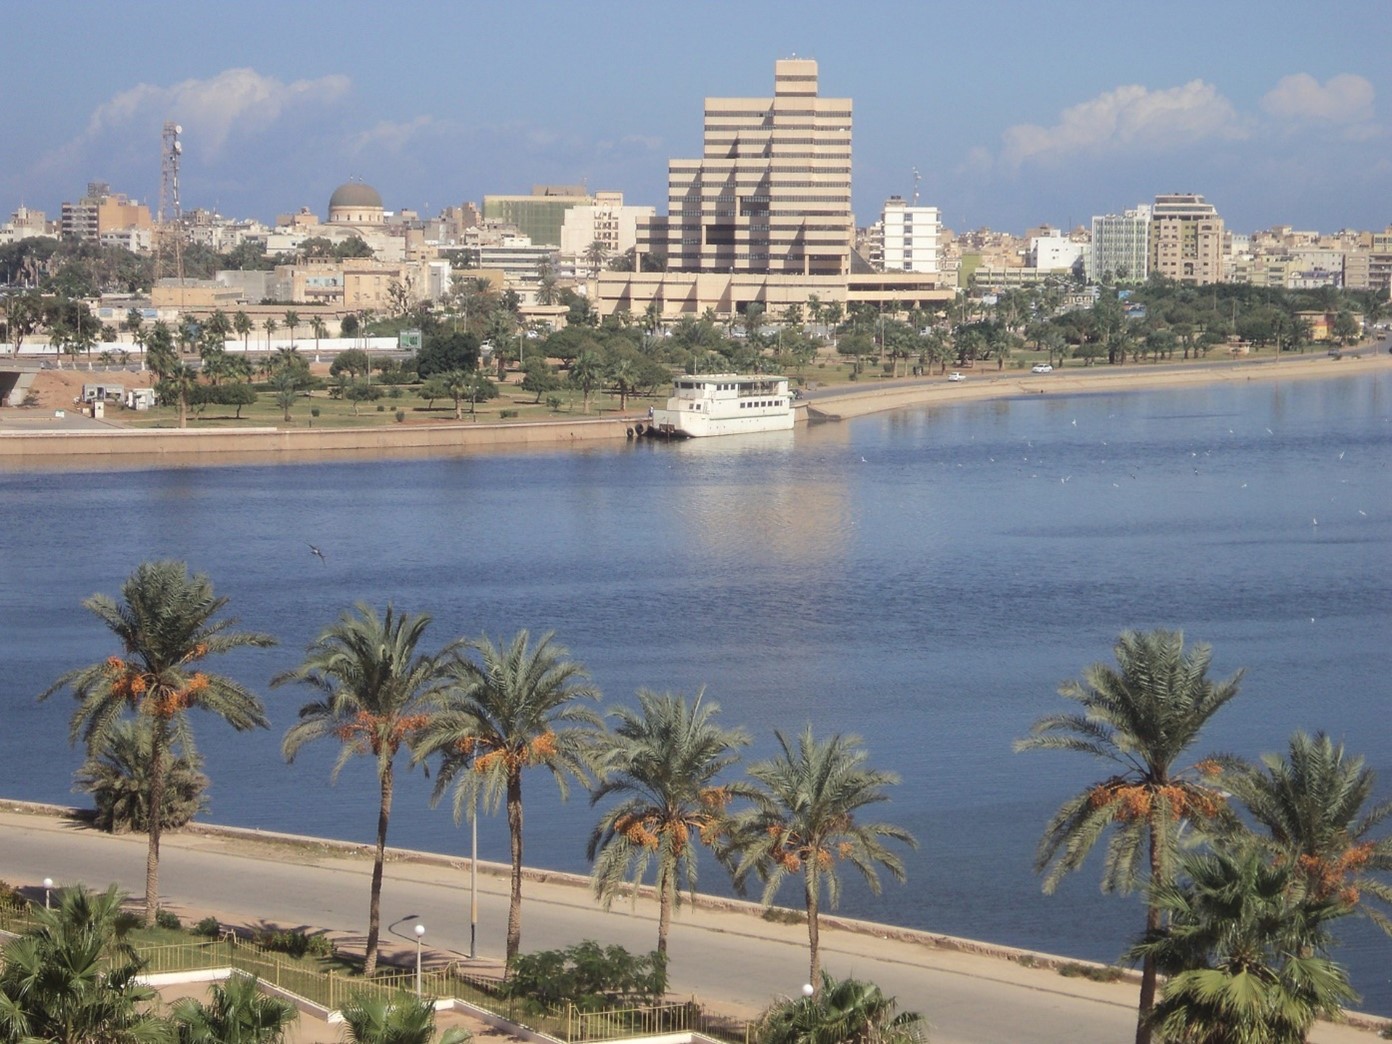 View across the central lake of Benghazi, prior to the 2011 civil war